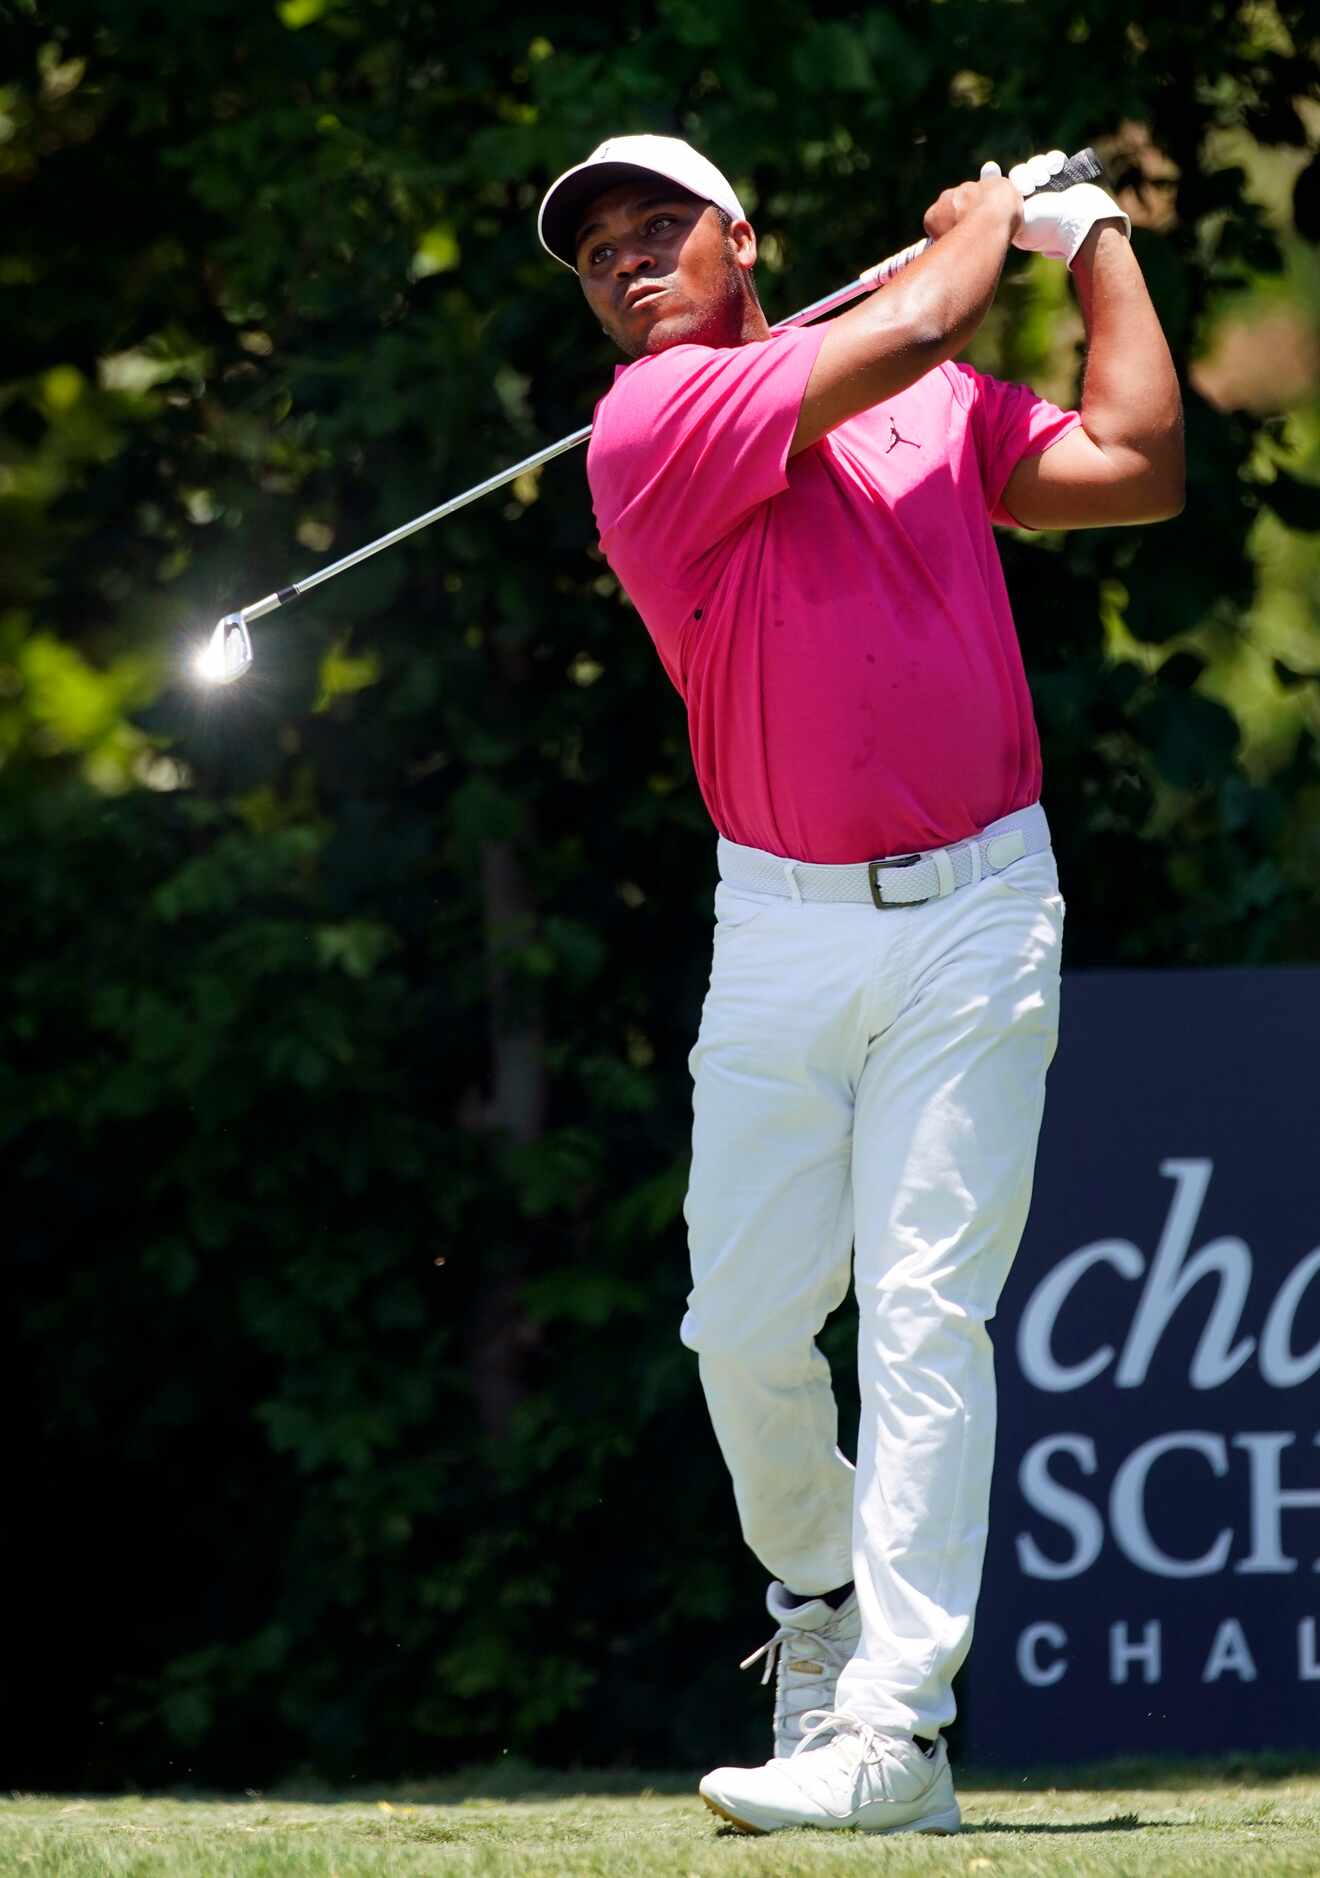 PGA Tour golfer Harold Varner III
tees off of No. 6 during the final round of the Charles...